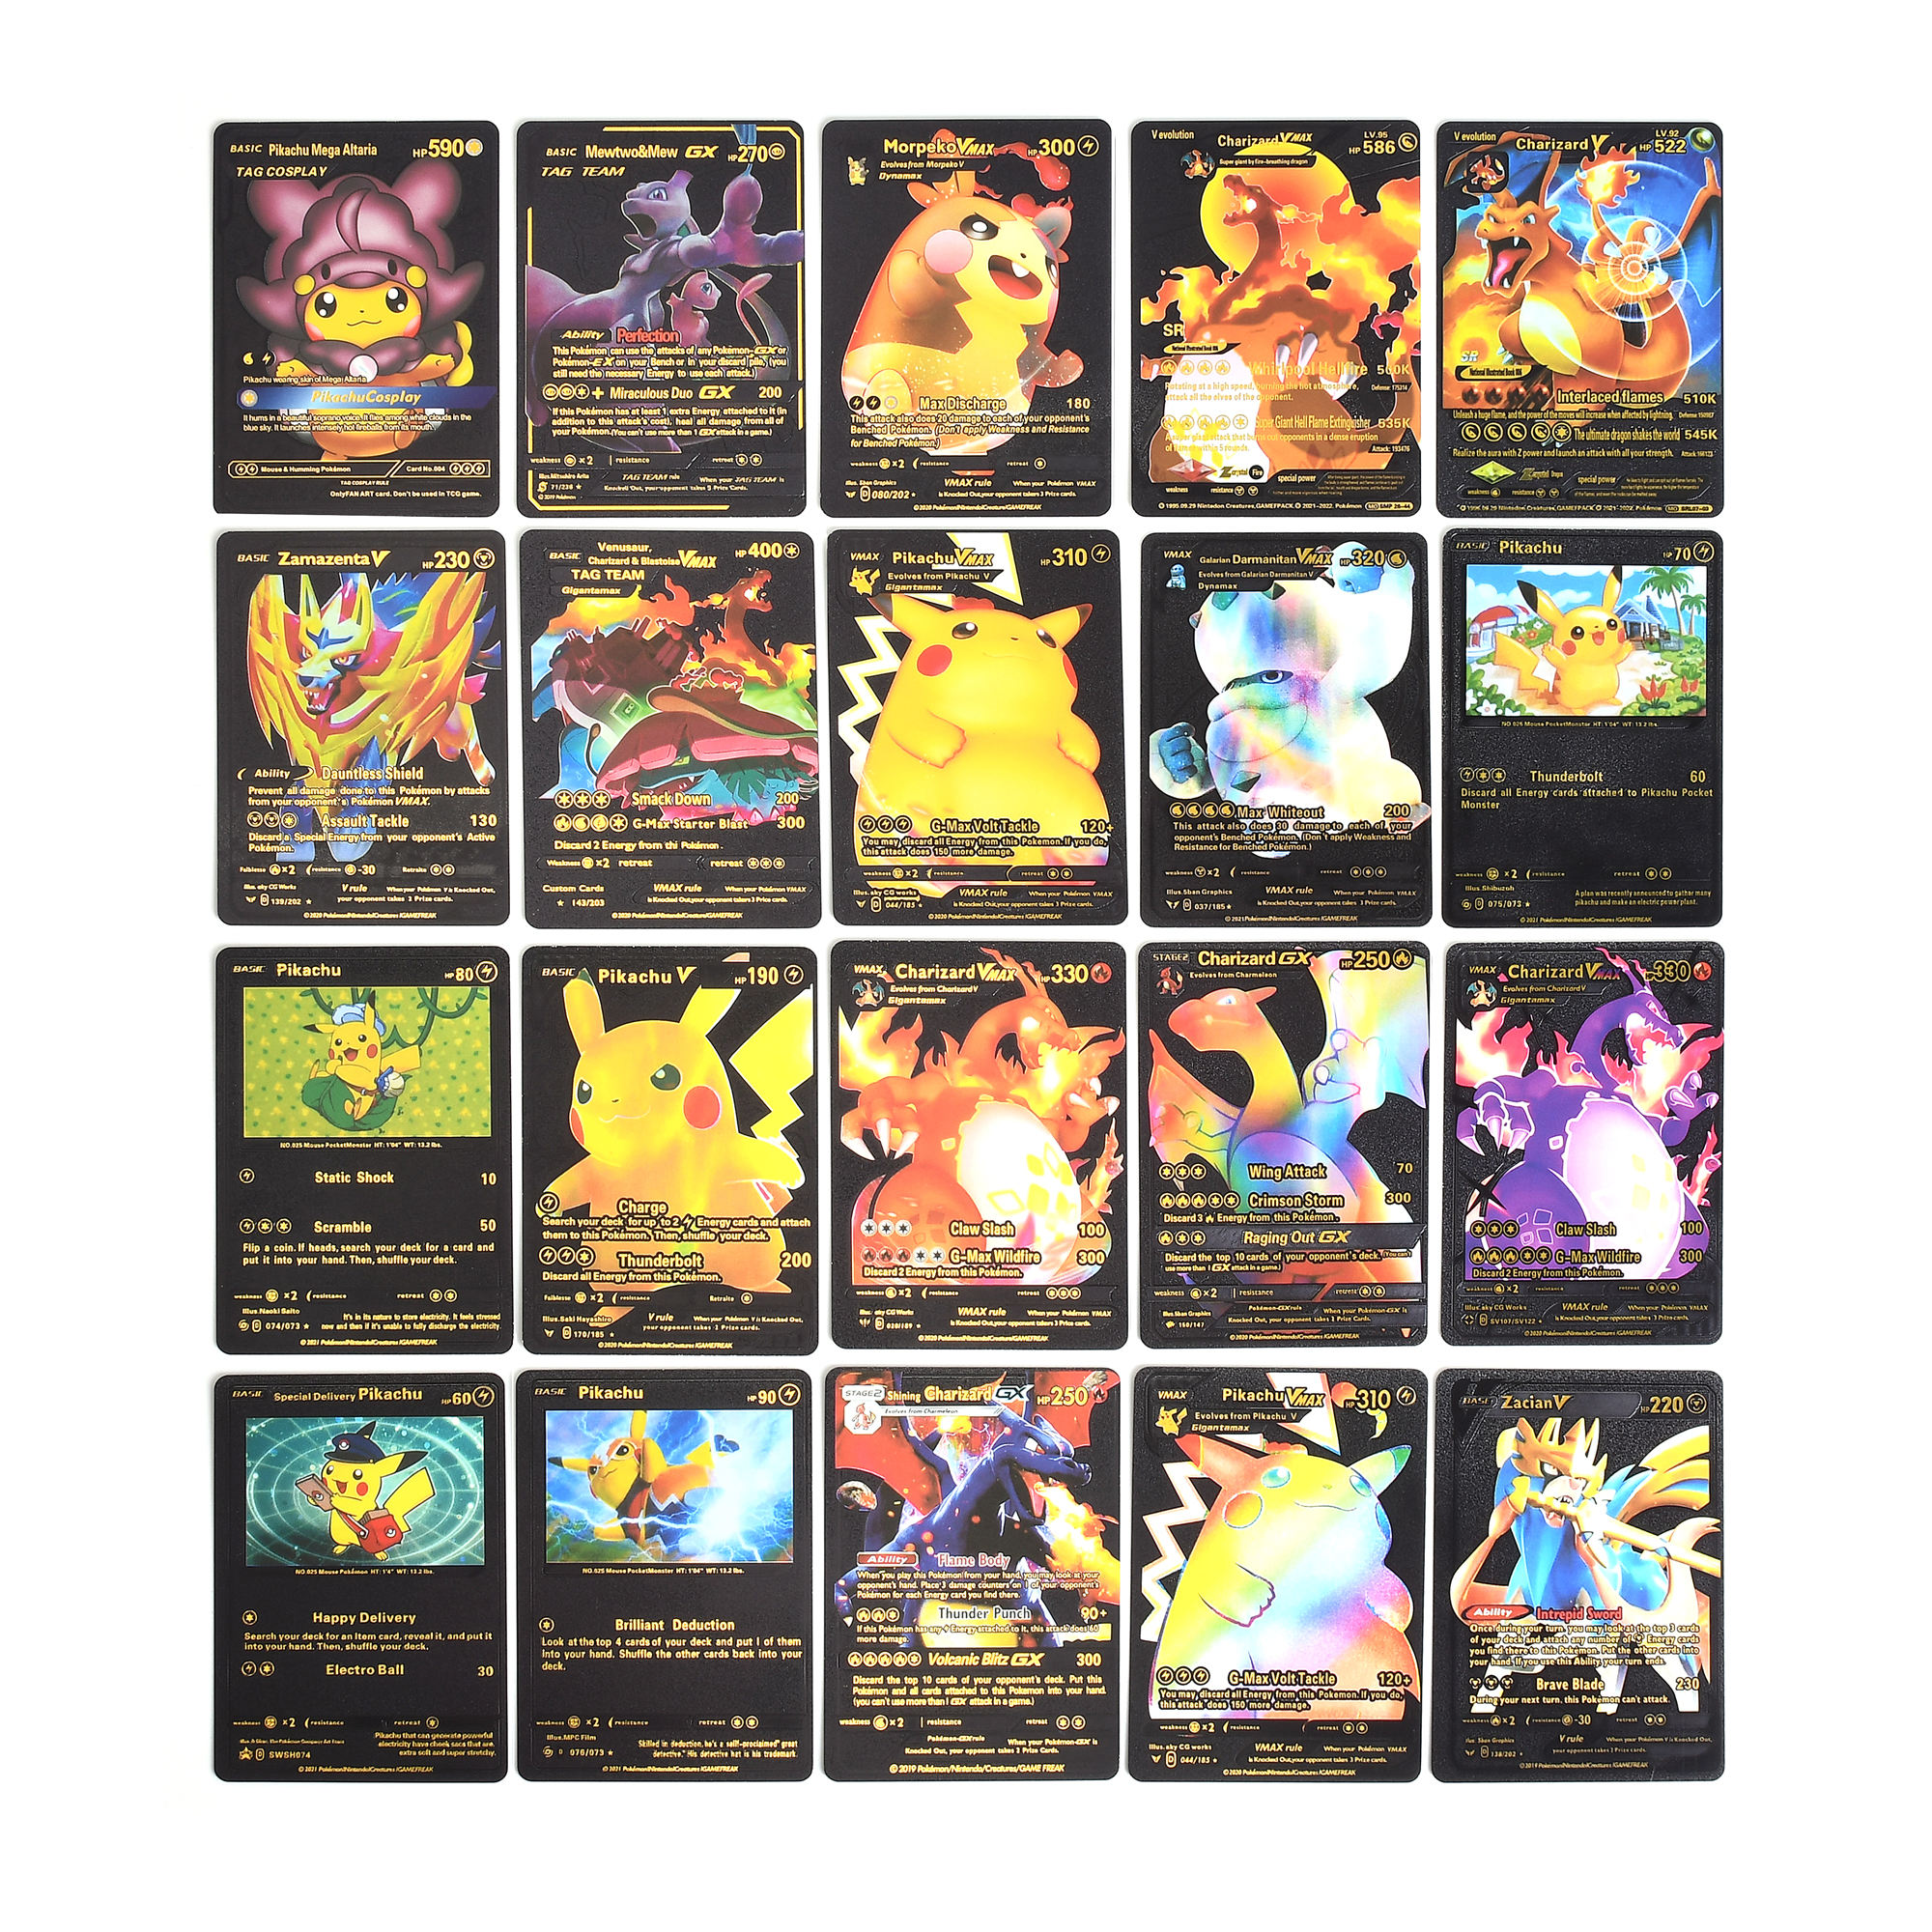 buy cases of pokemon cards wholesale